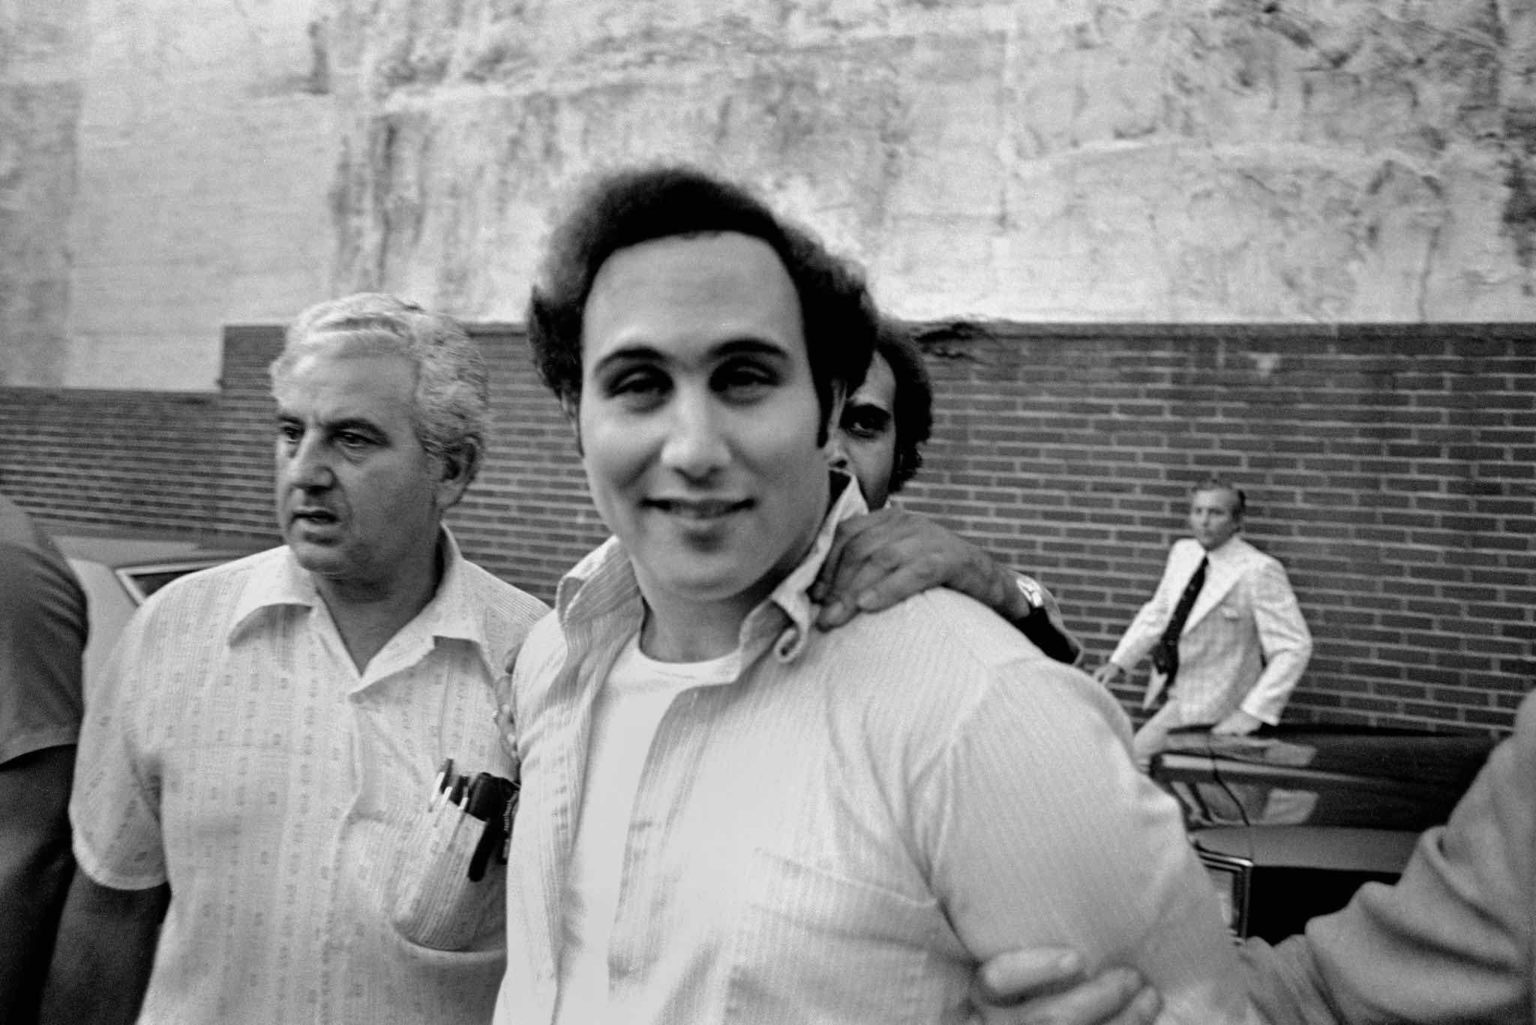 David Berkowitz terrorized New York in the 70s. "Son of Sam" claimed his neighbor’s dog Sam was possessed by Satan and commanded Berkowitz to kill.